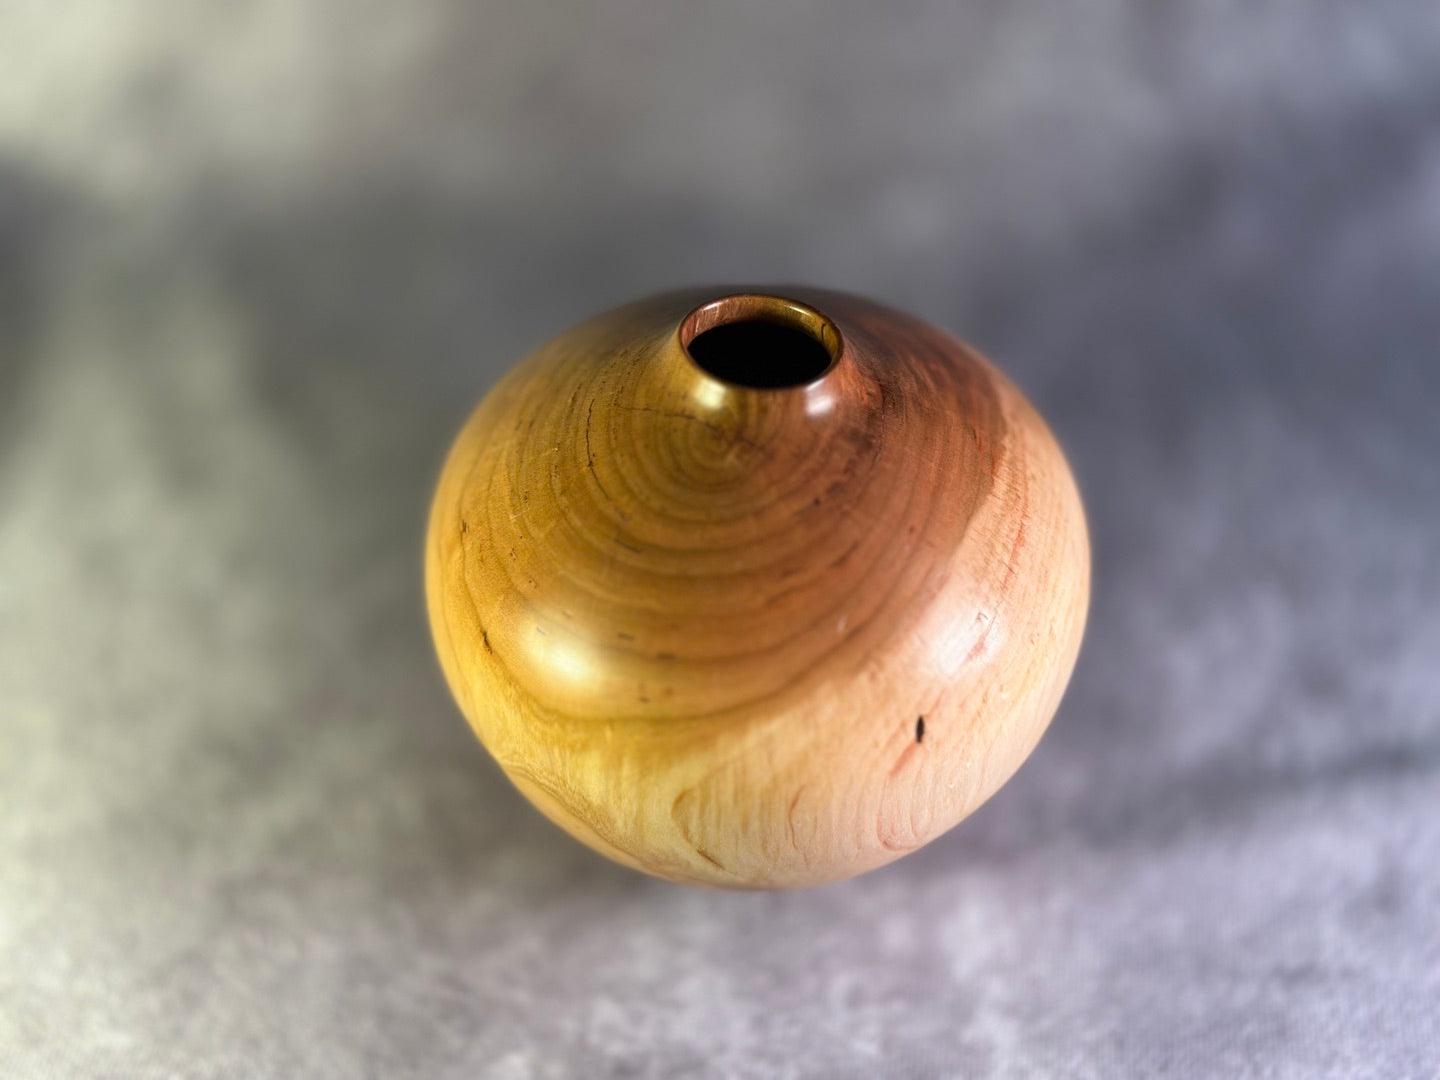 Small Black Cherry Hollow Form - Rare Earth Bowls